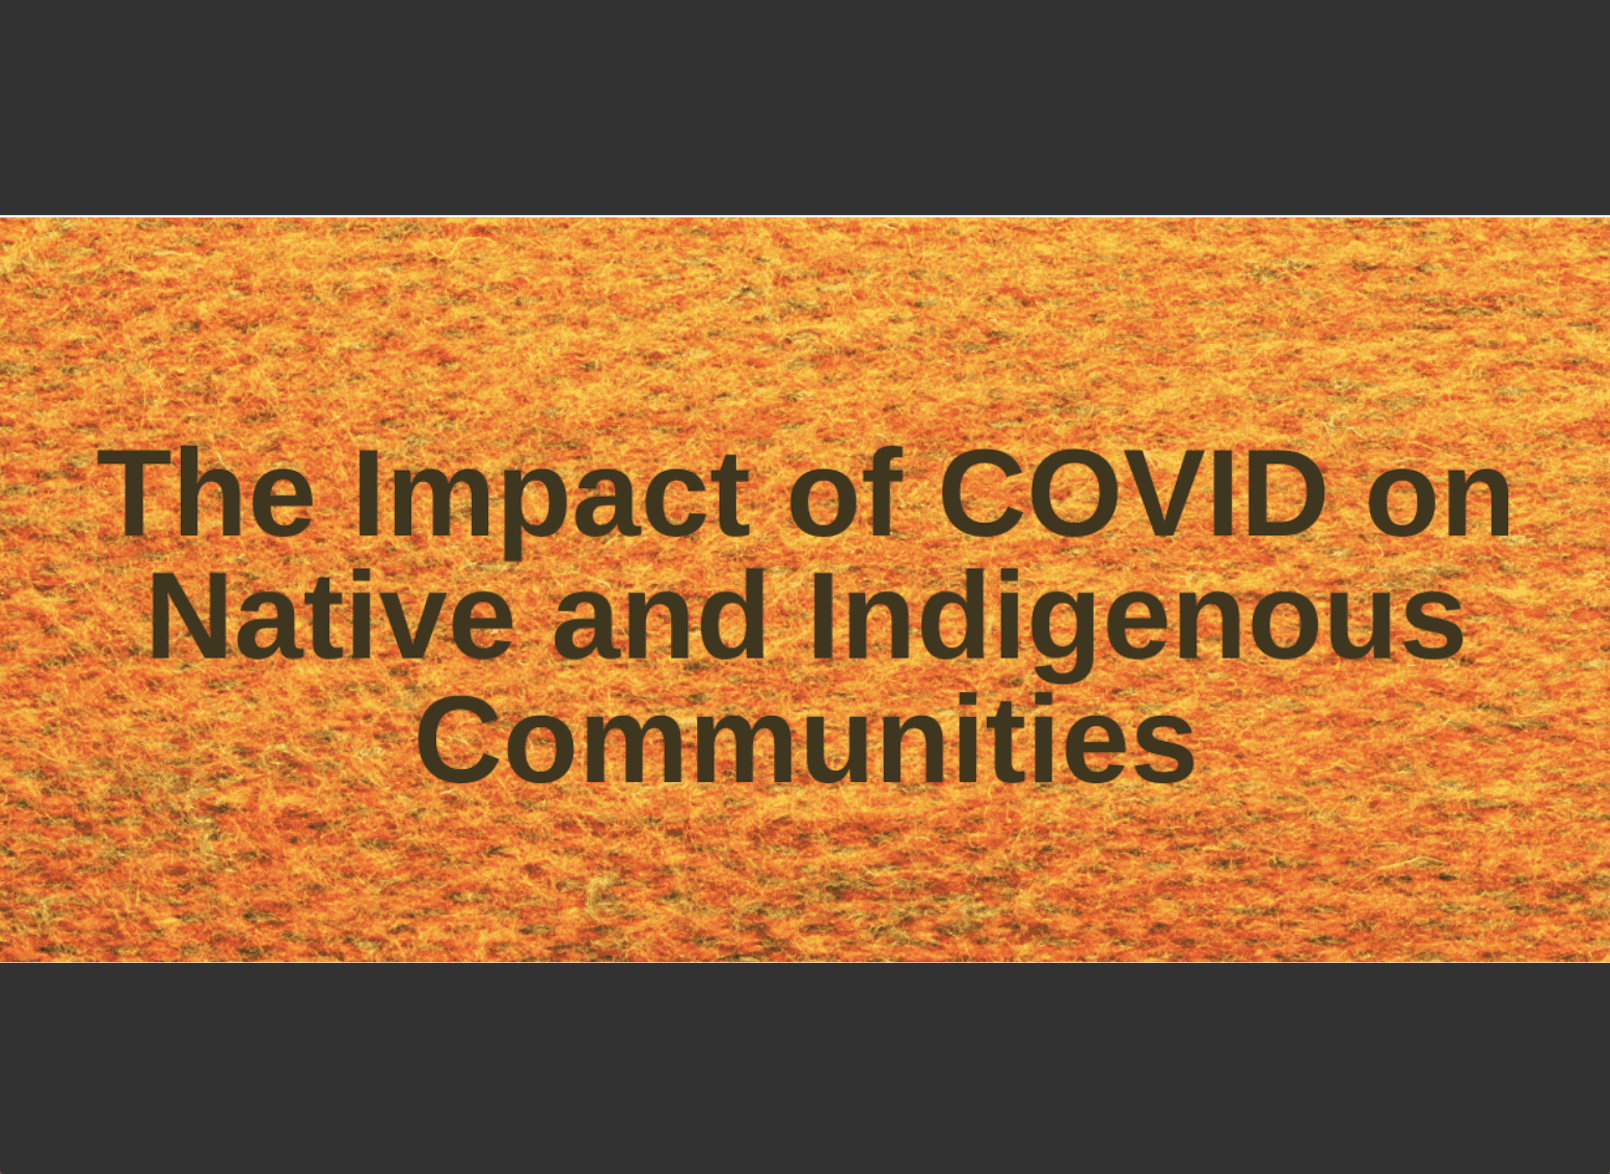 Impact of COVID on Natin and Indigenous Communities